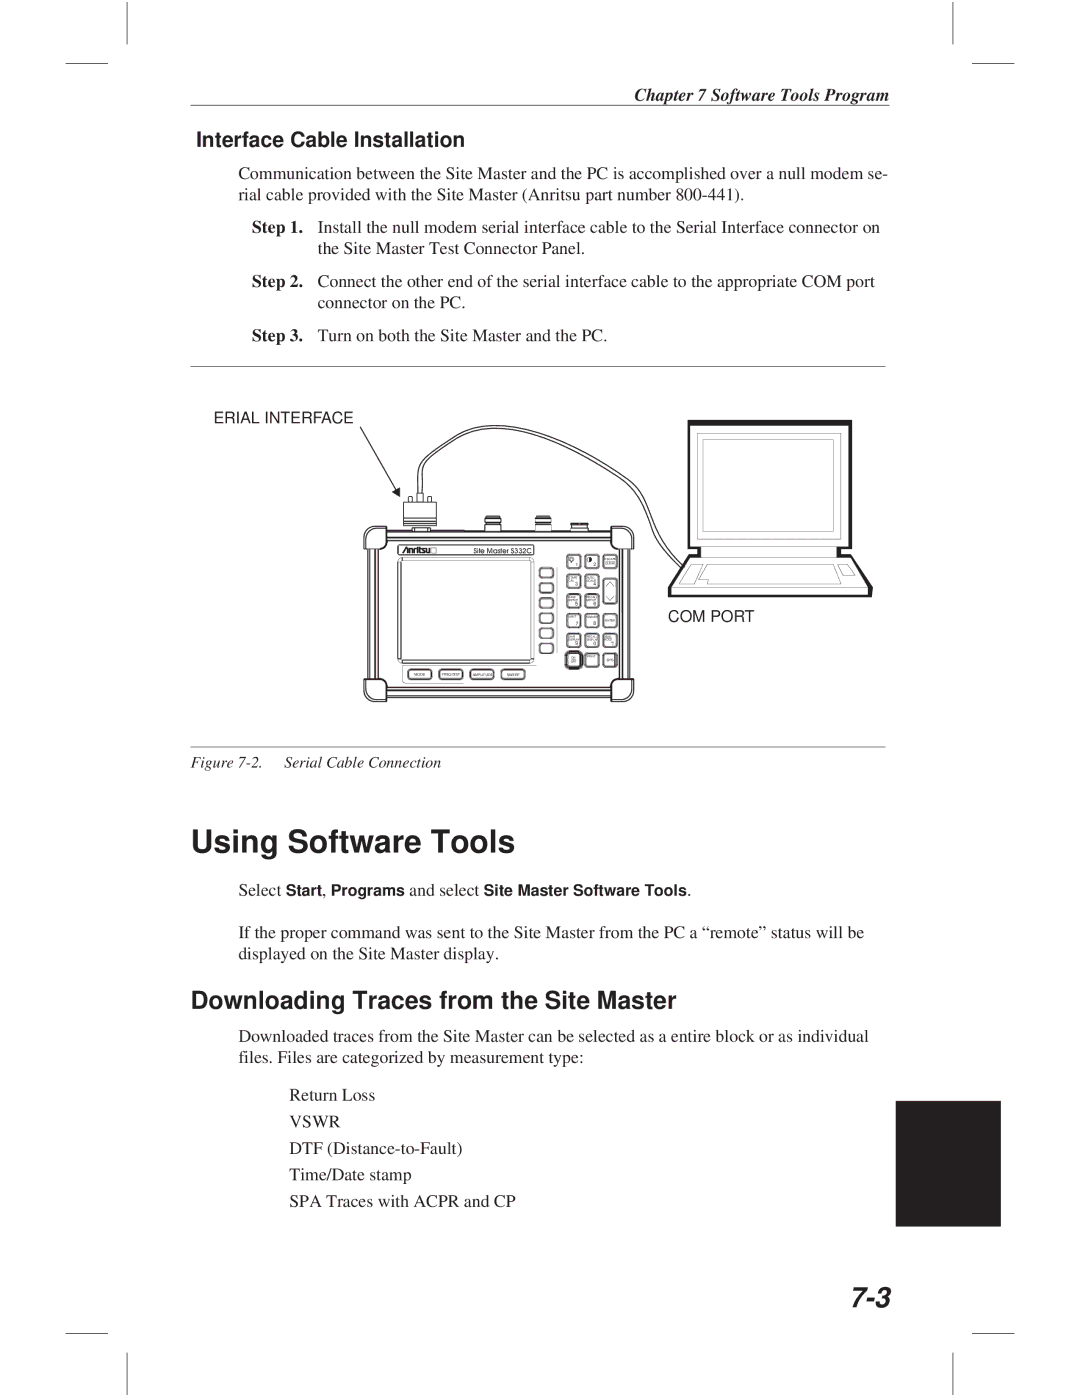 Anritsu S113C, S332C, S114C Using Software Tools, Downloading Traces from the Site Master, Interface Cable Installation 